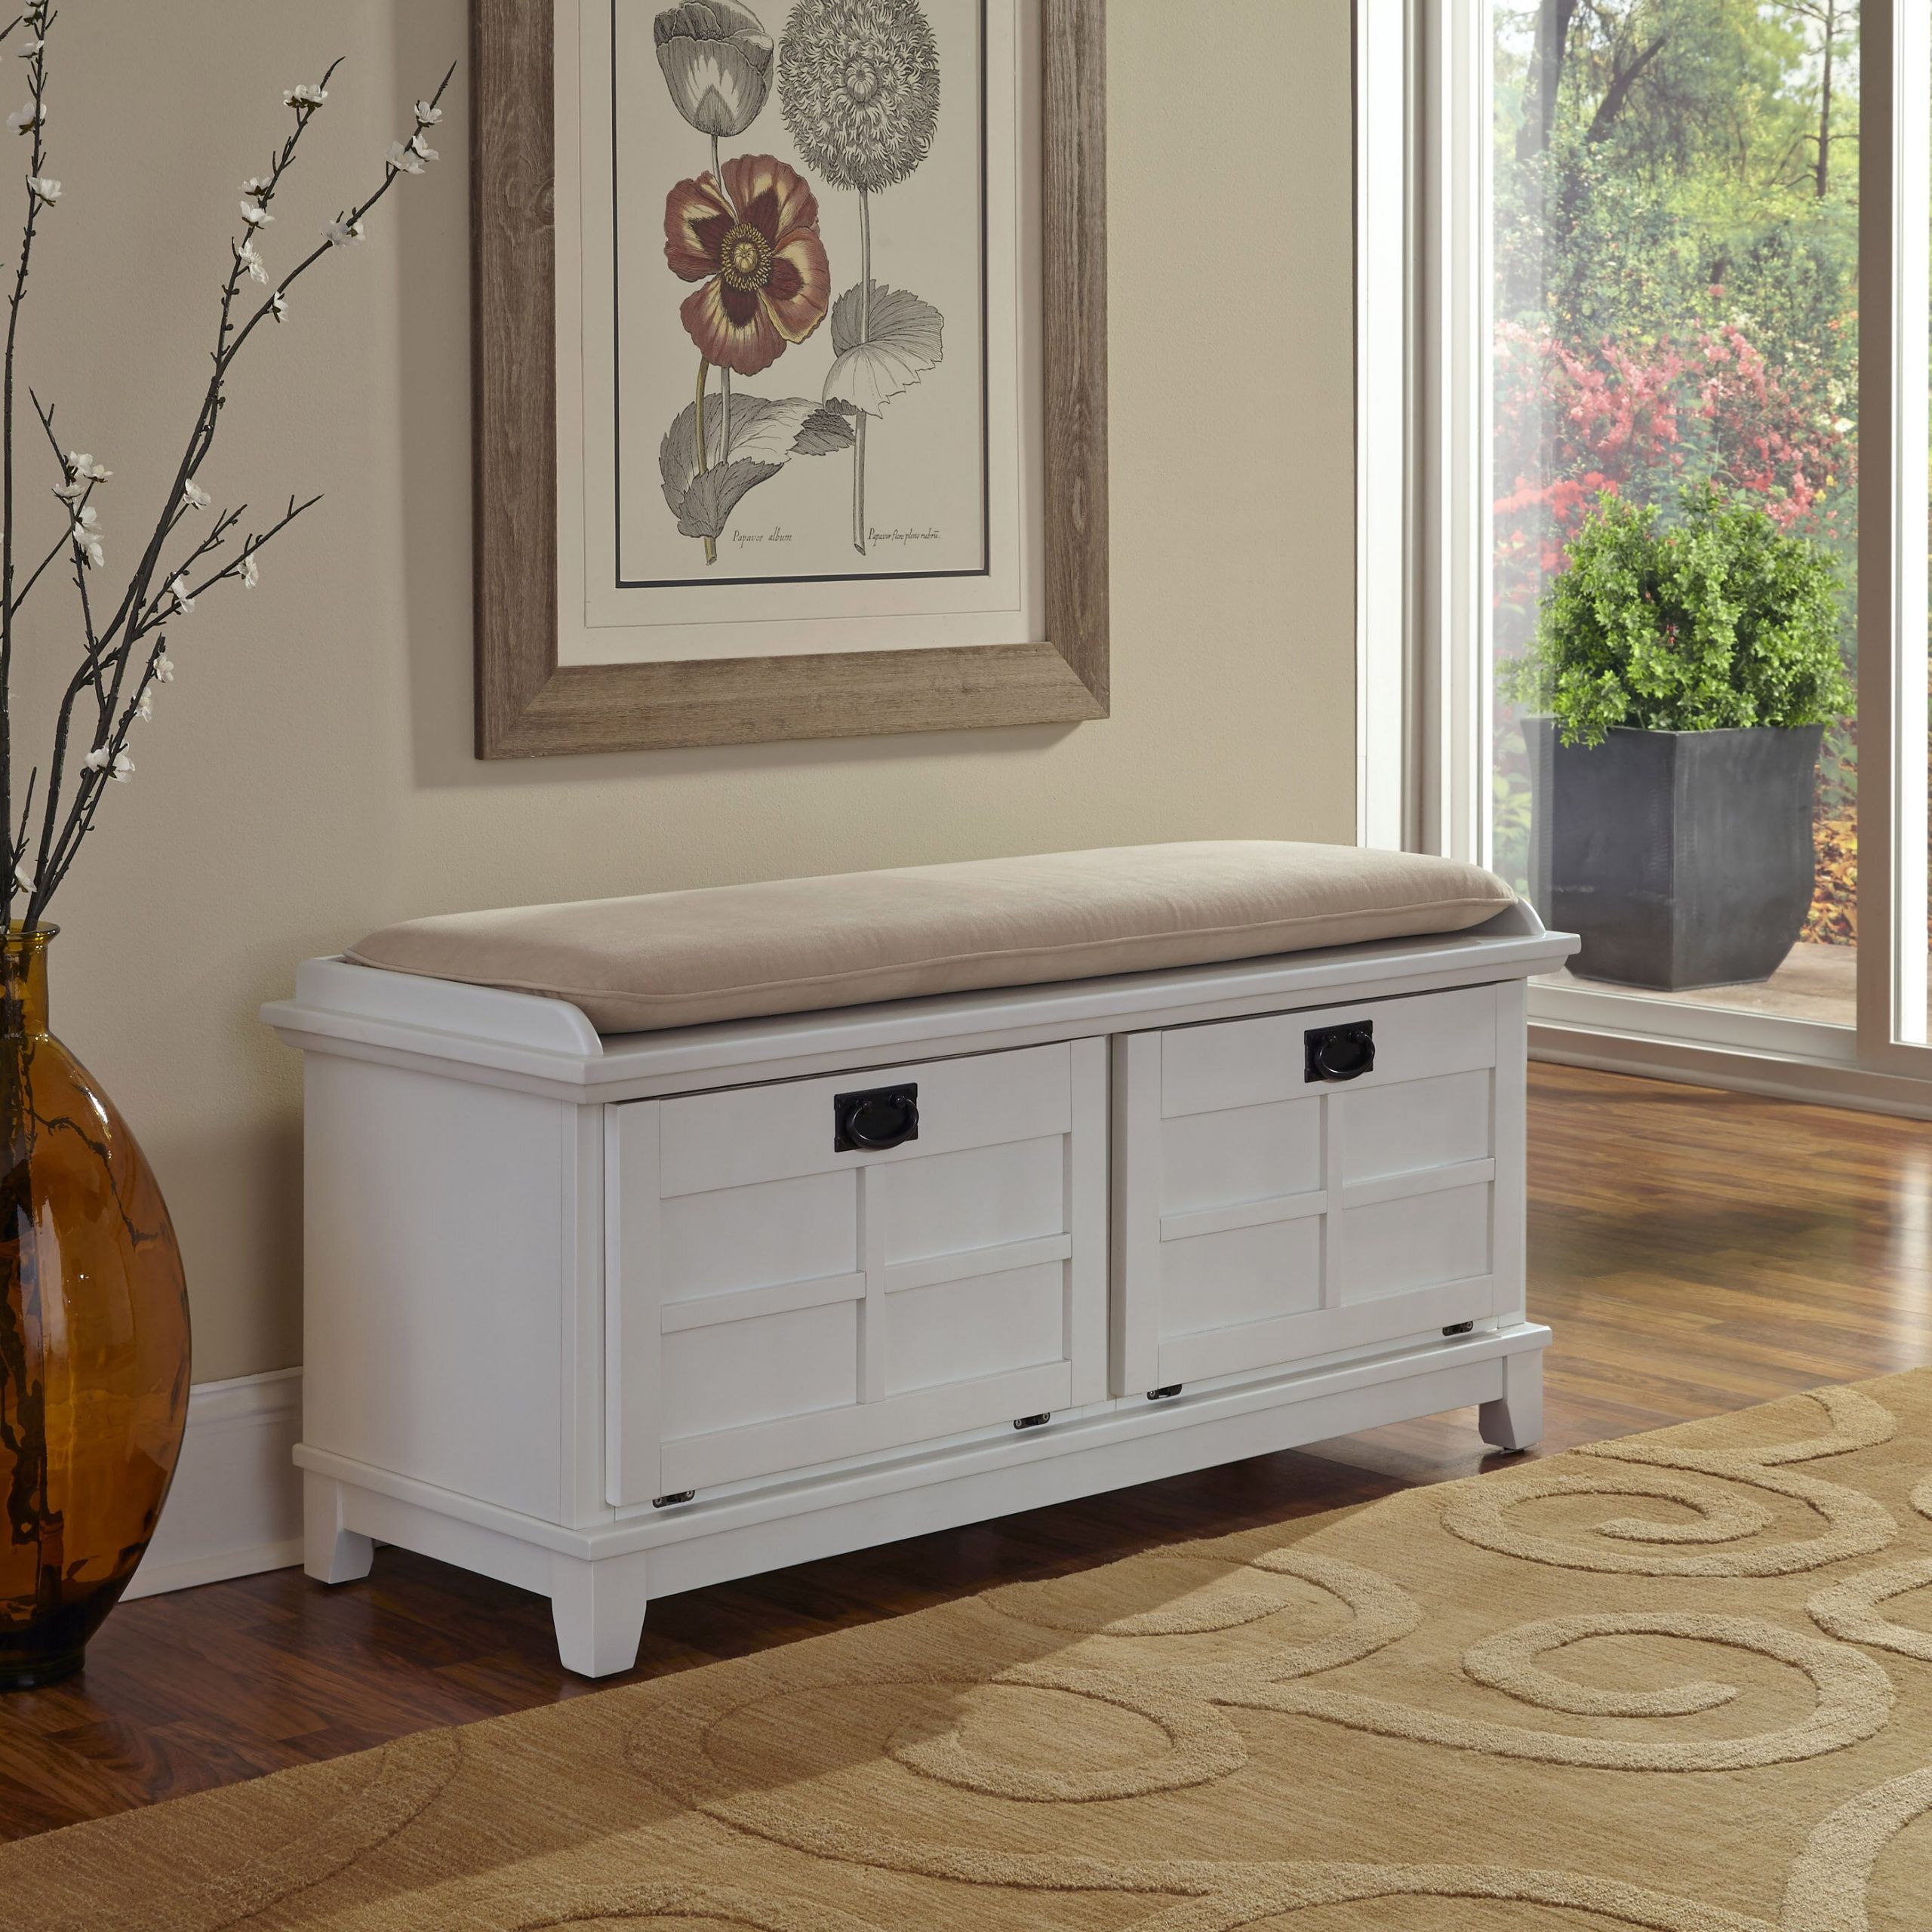 Hallway Bench With Storage
 Alcott Hill Lakeview Wood Storage Entryway Bench & Reviews